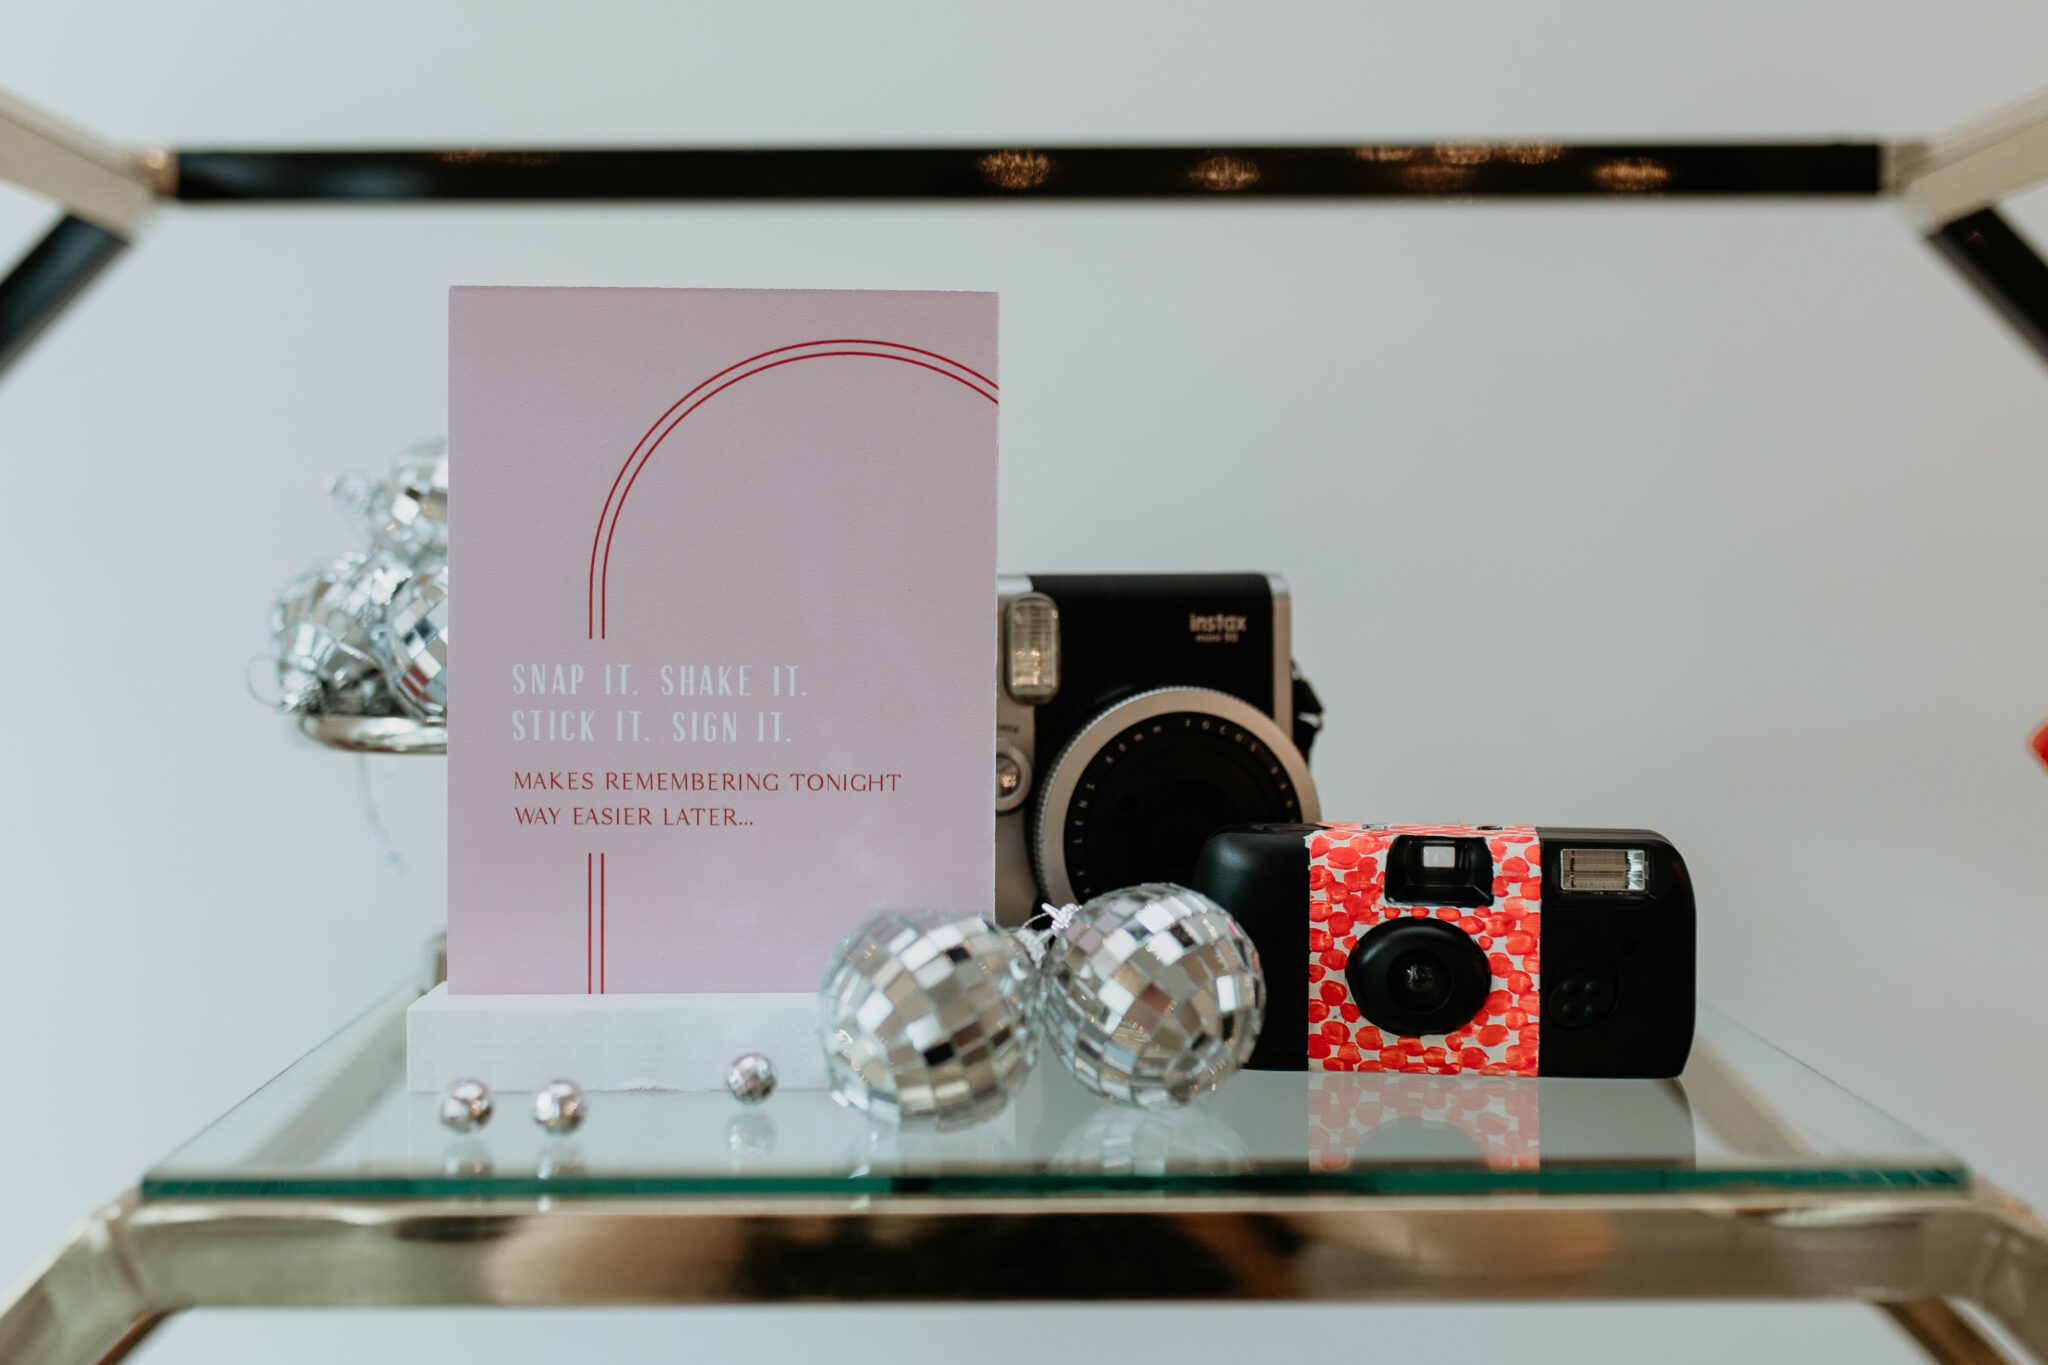 Chic wedding reception decor featuring a fusion of modern and retro aesthetics: modern decor elements alongside retro-inspired stationery and signage, styled with vintage cameras and mini disco balls, creating a dynamic visual contrast.